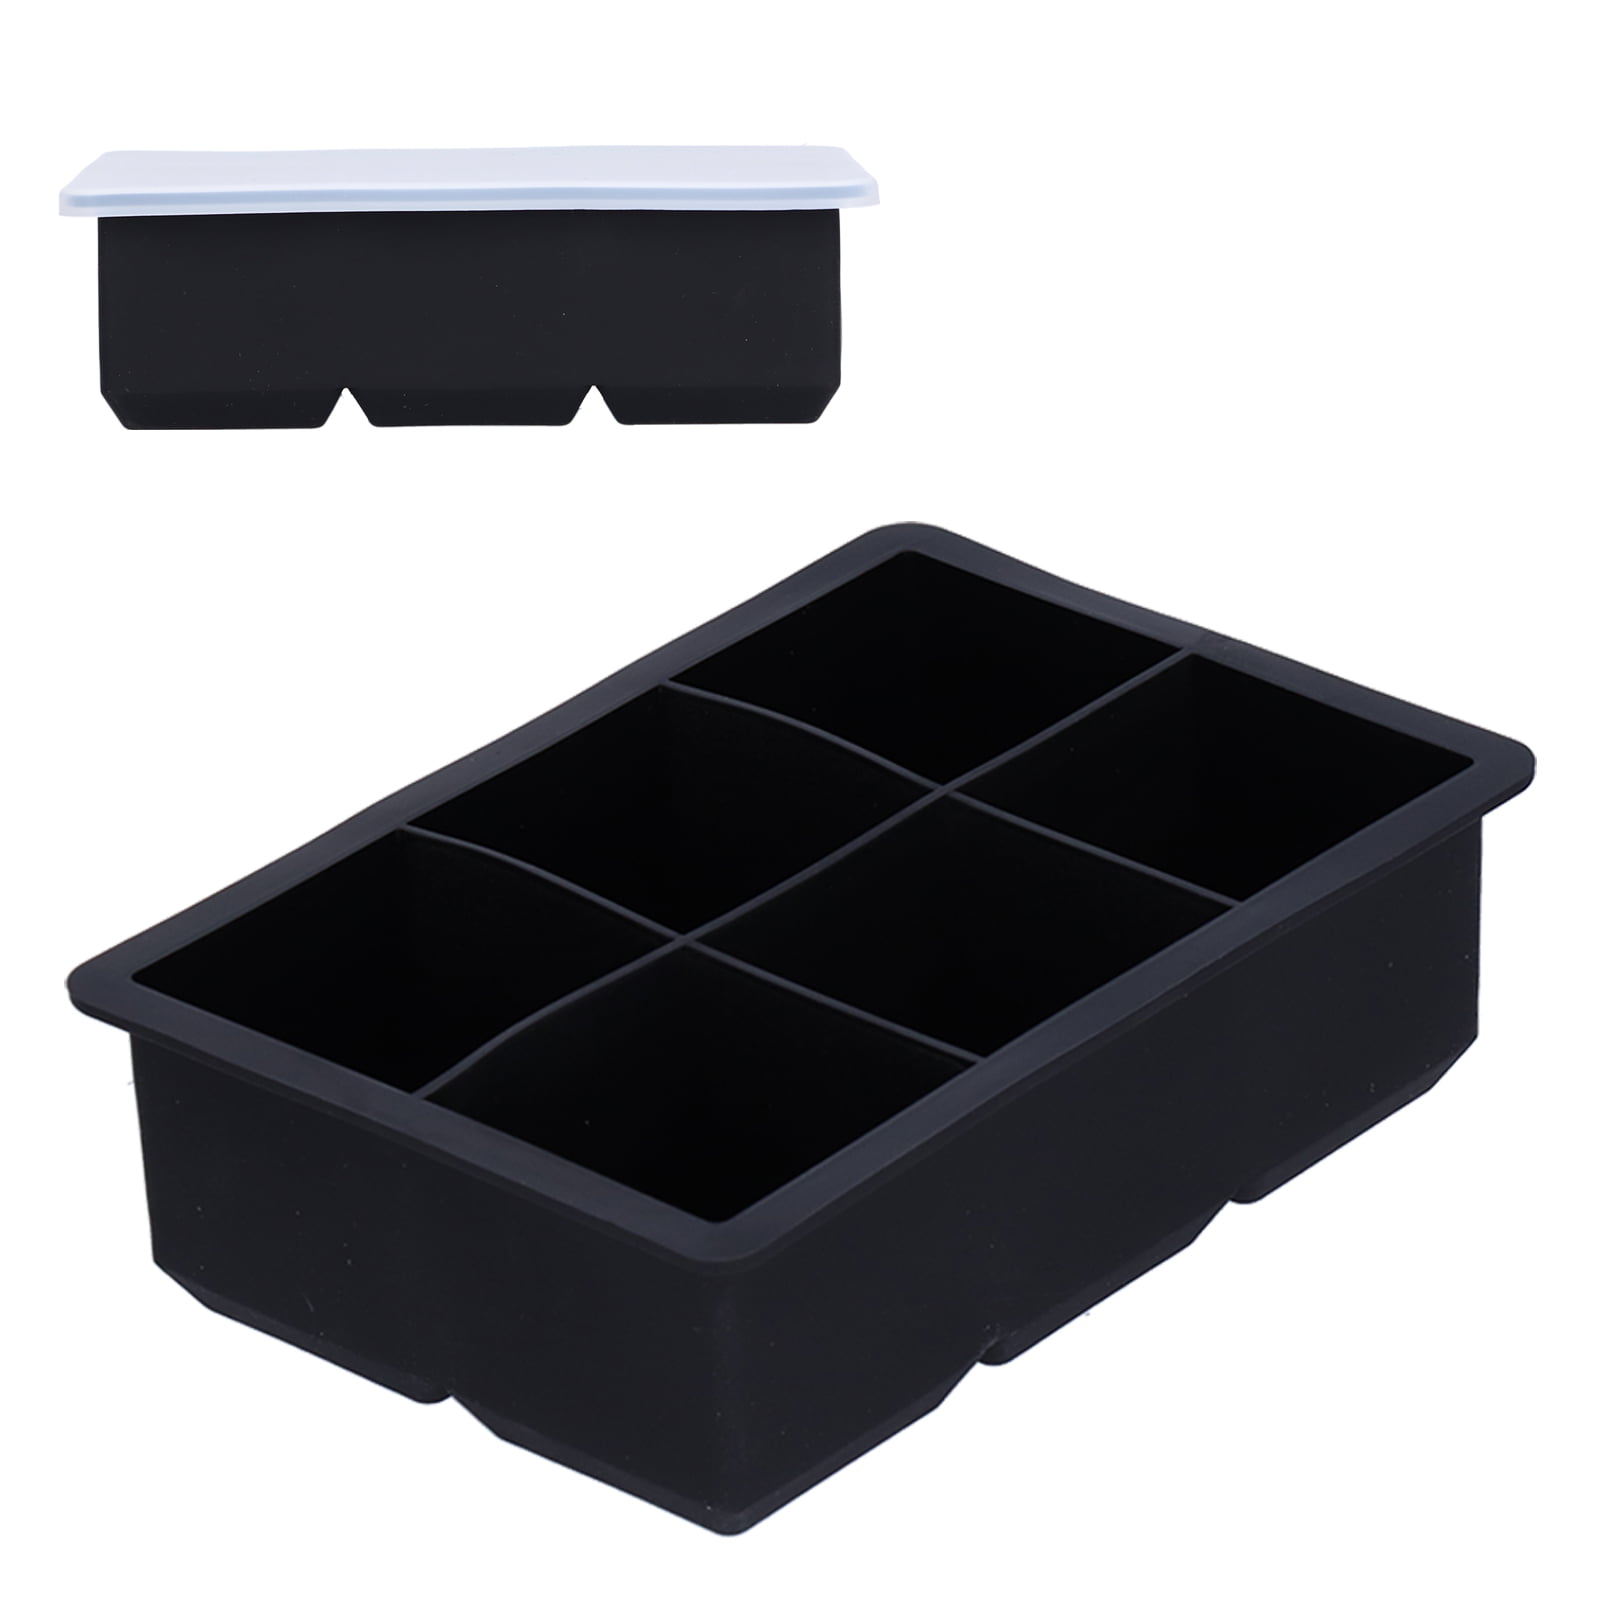 Details about   8 Big Giant Jumbo Large Size Silicone Ice Cube Mould Square Mold Tray DIY Maker 